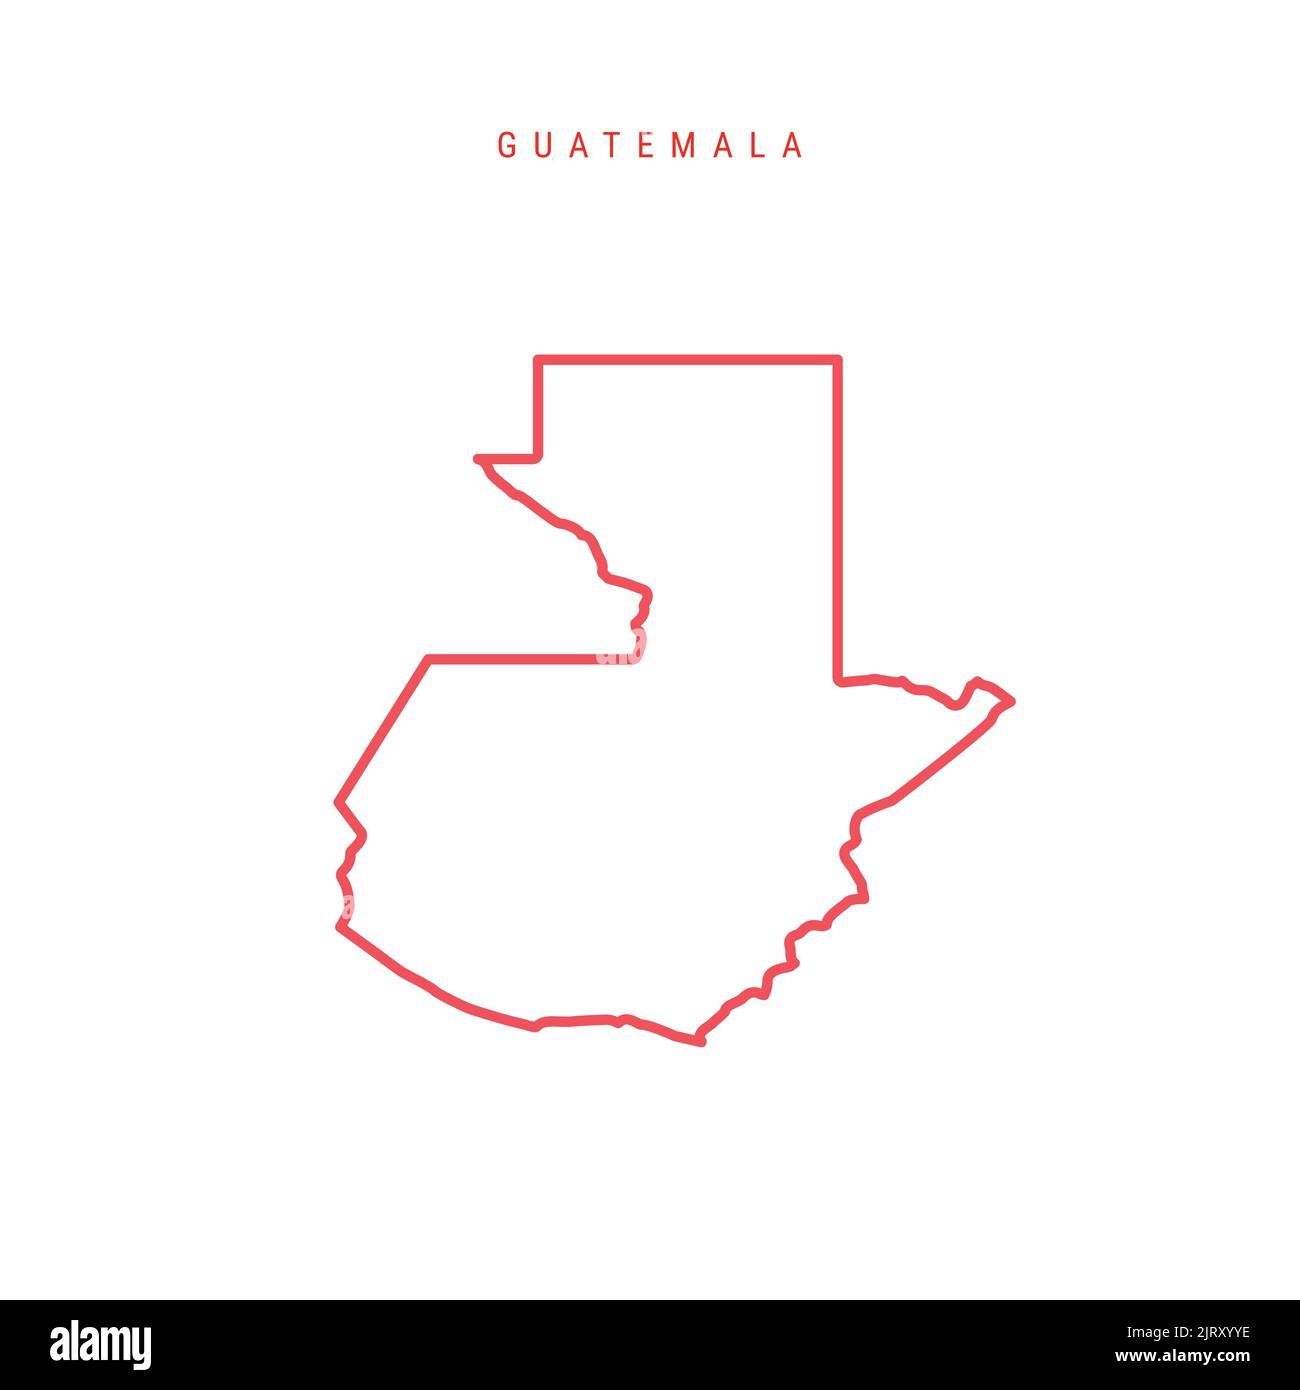 Guatemala editable outline map. Guatemalan red border. Country name. Adjust line weight. Change to any color. Vector illustration. Stock Vector